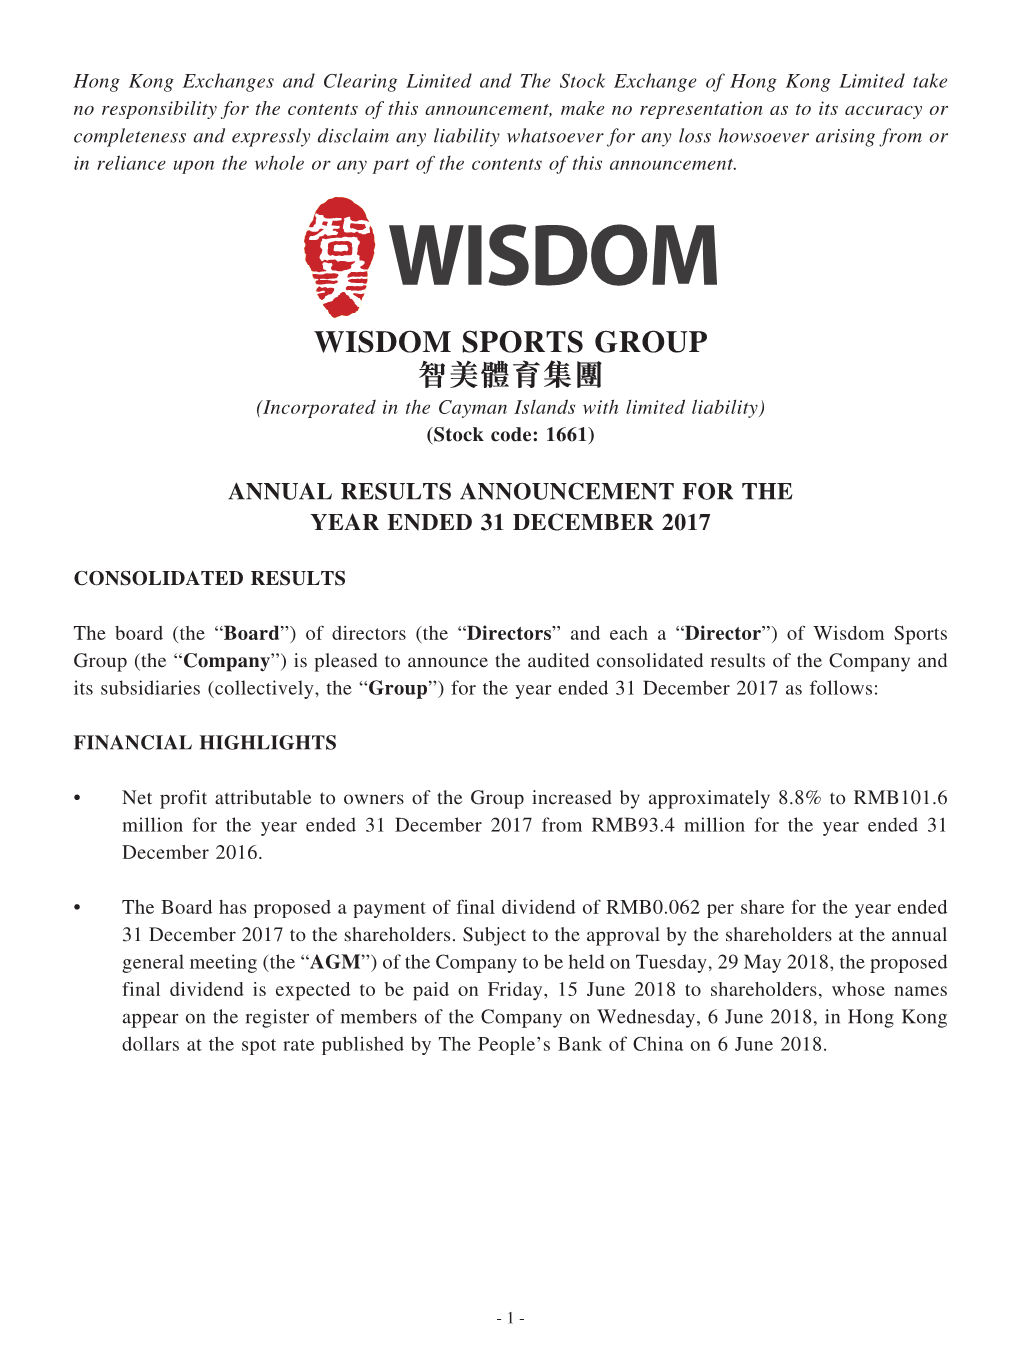 WISDOM SPORTS GROUP 智美體育集團 (Incorporated in the Cayman Islands with Limited Liability) (Stock Code: 1661)